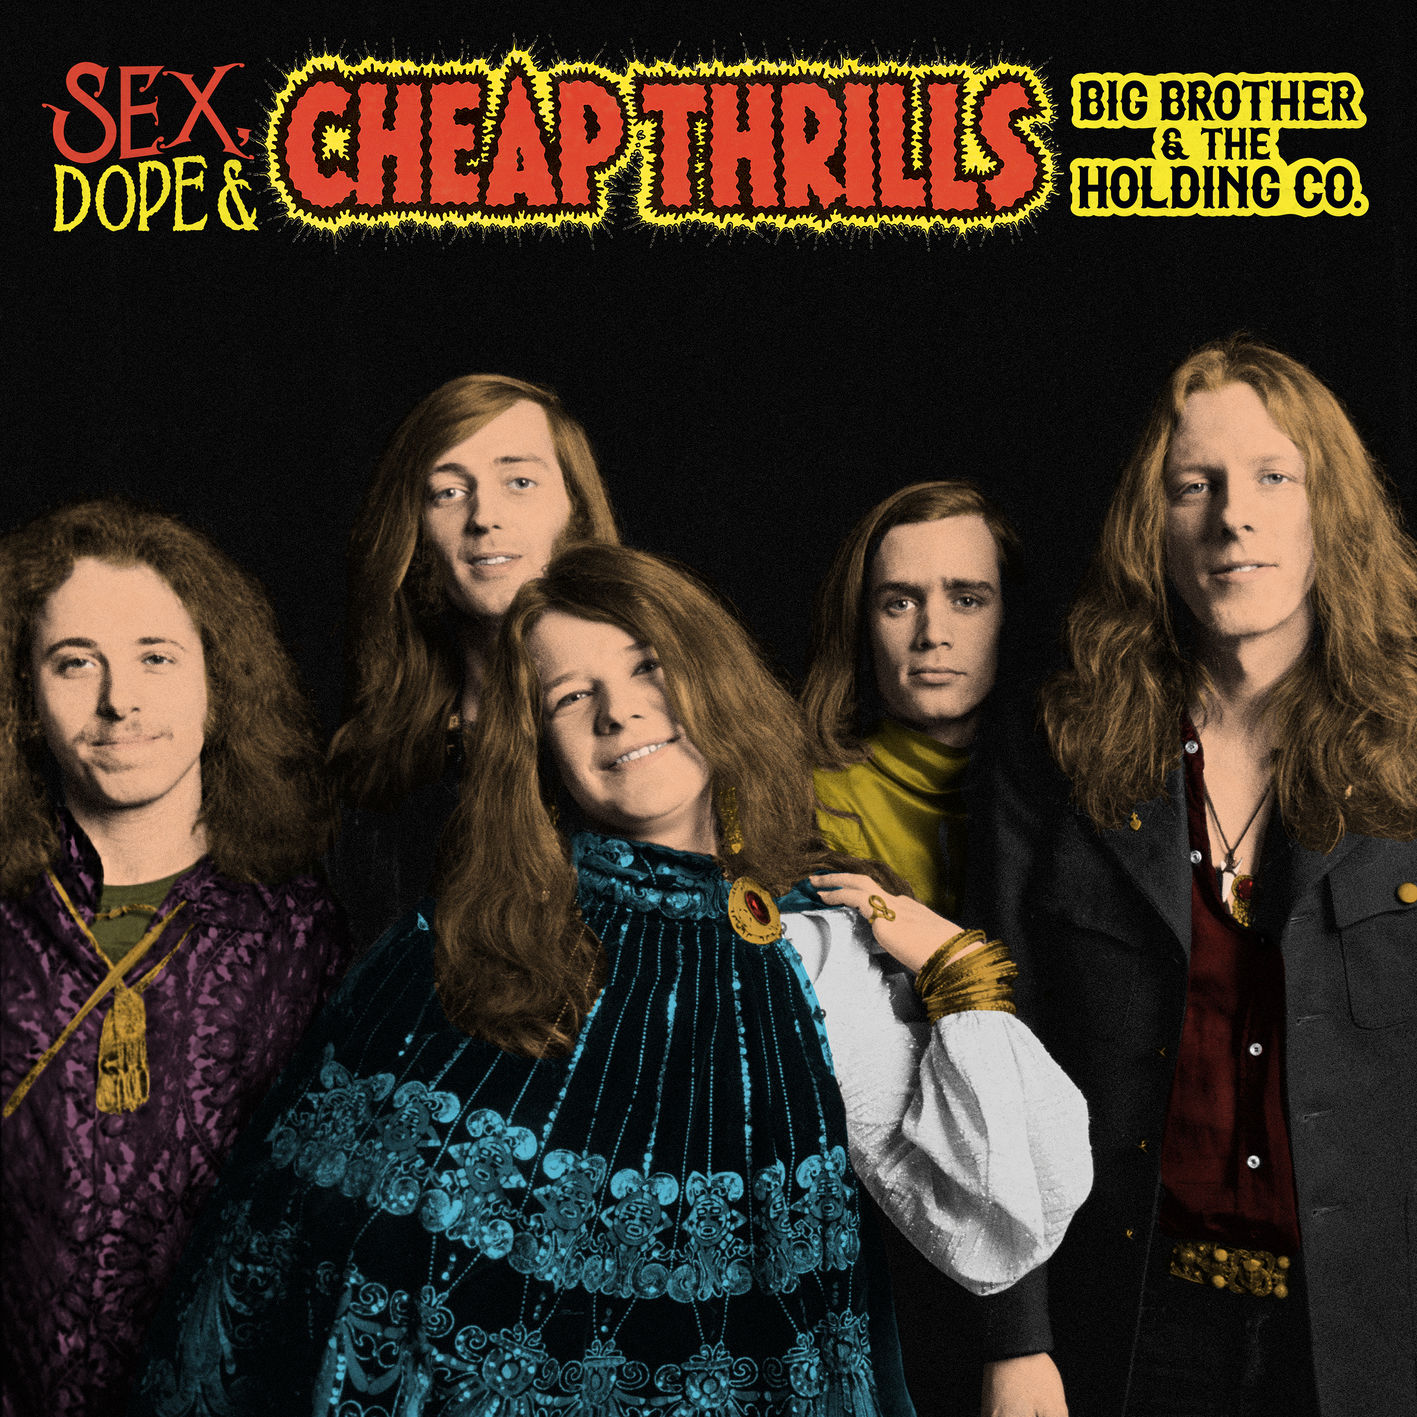 Big Brother & The Holding Company - Sex, Dope & Cheap Thrills [2018] cd01 24-88.2